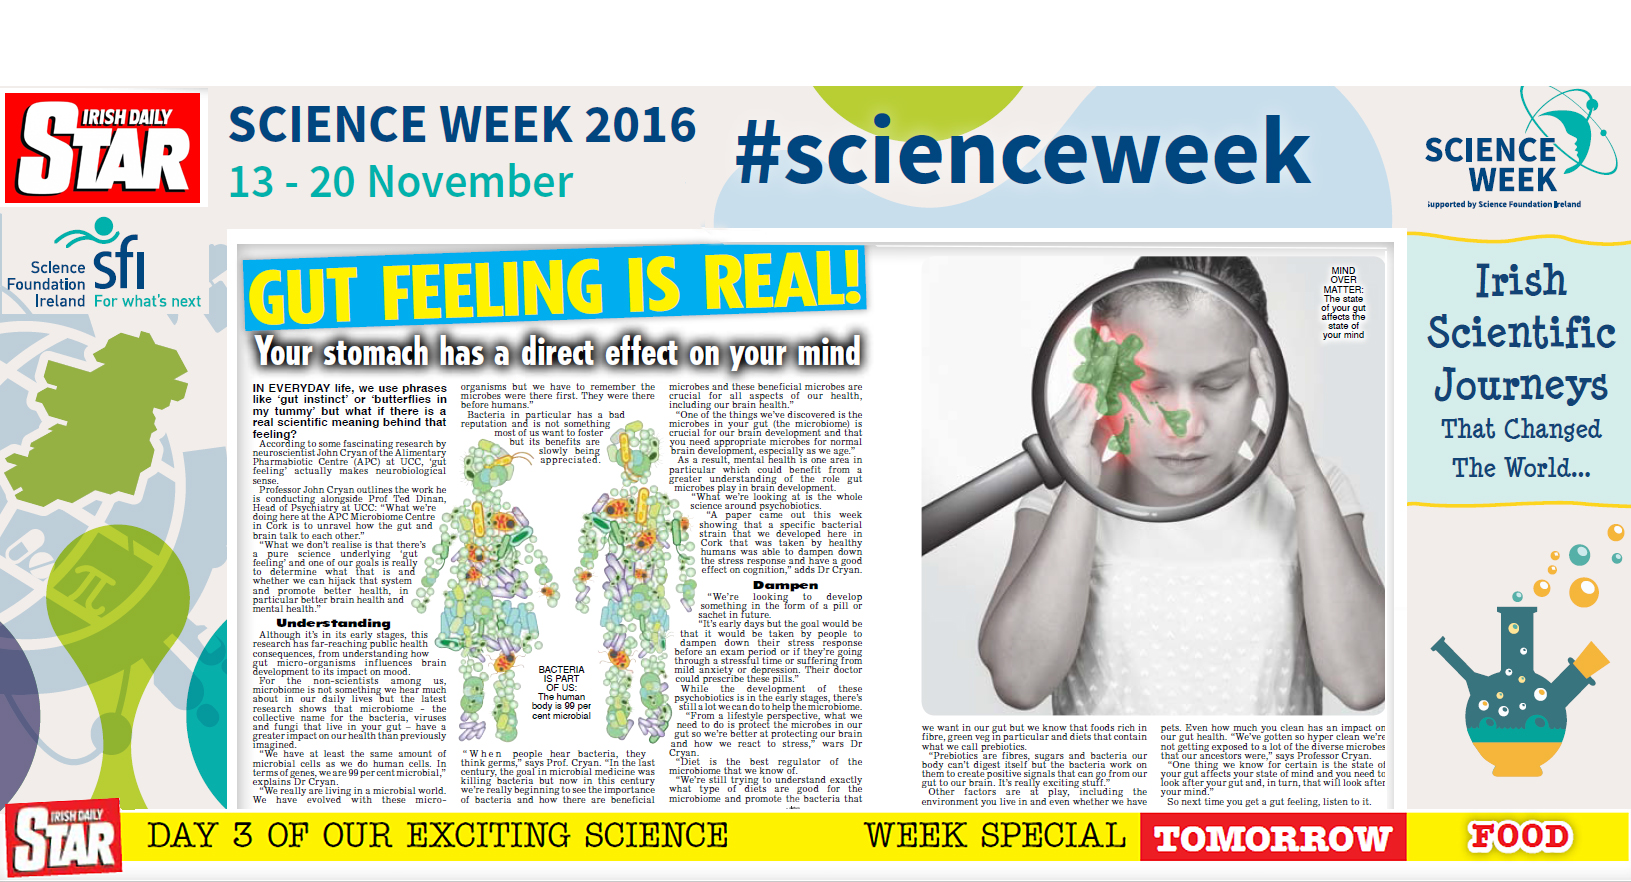 Prof Cryan Profiled in The Star for Science Week